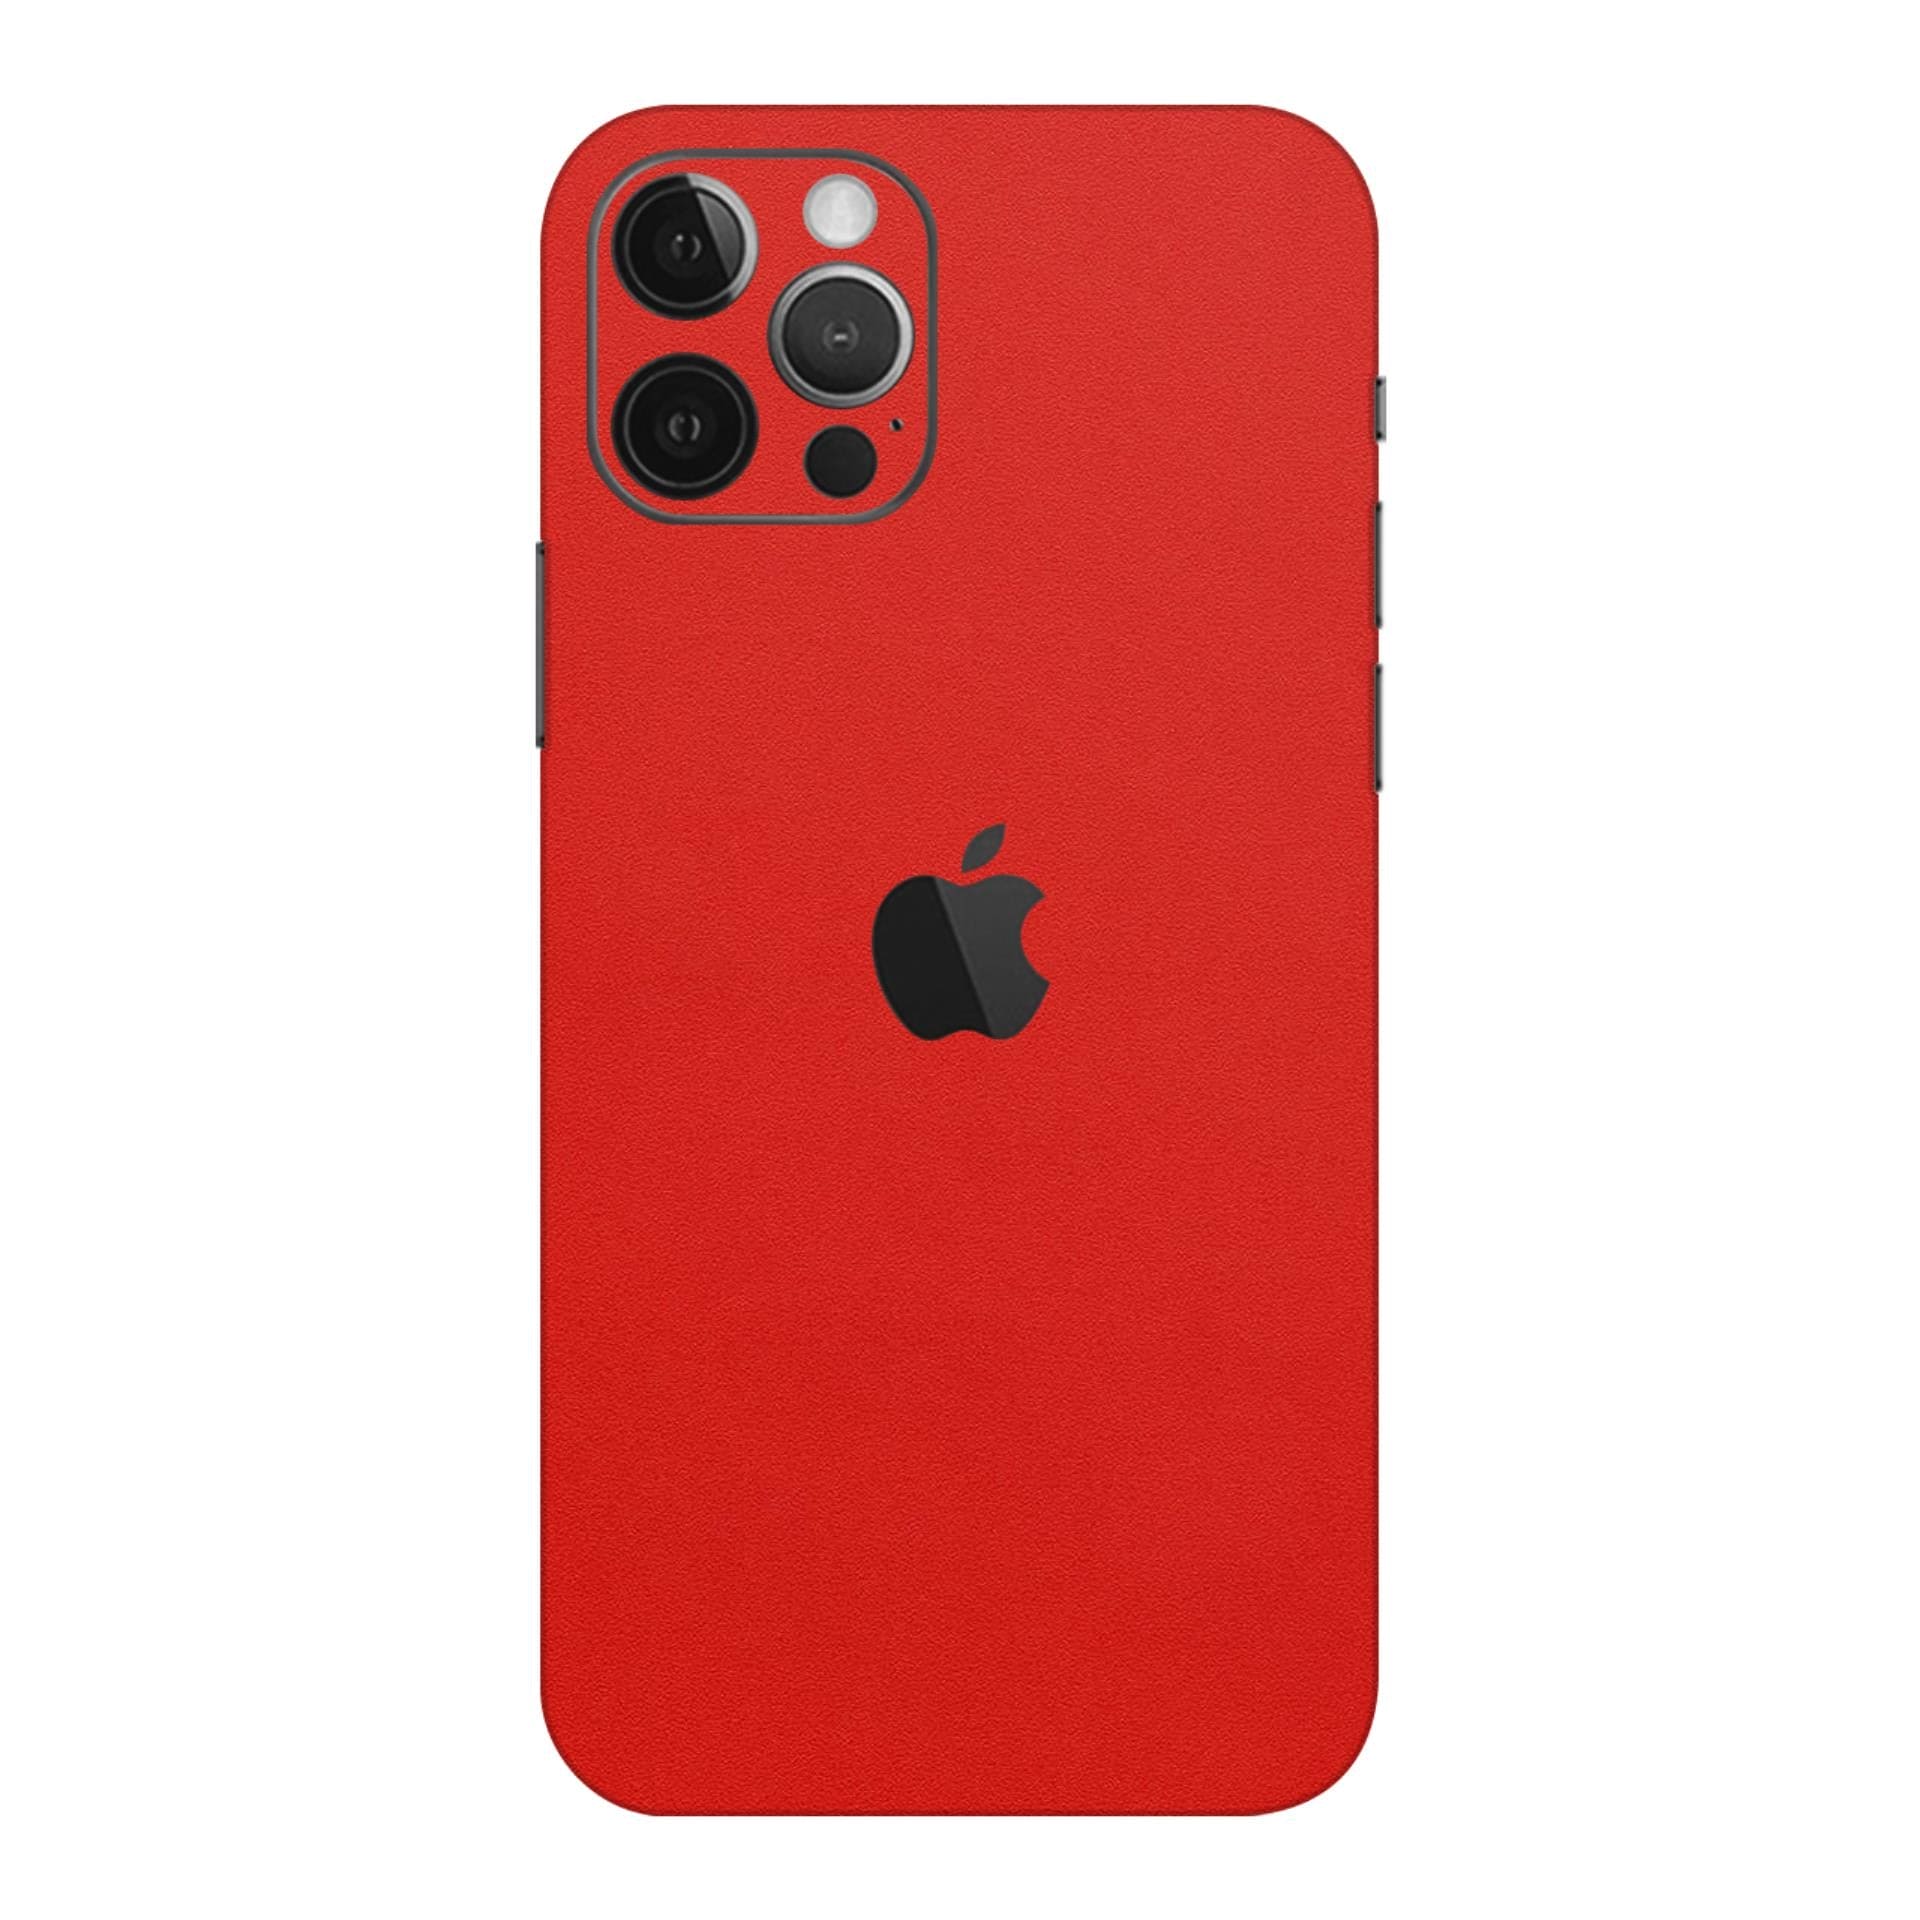 iphone 12 Pro Max Matte Red skins